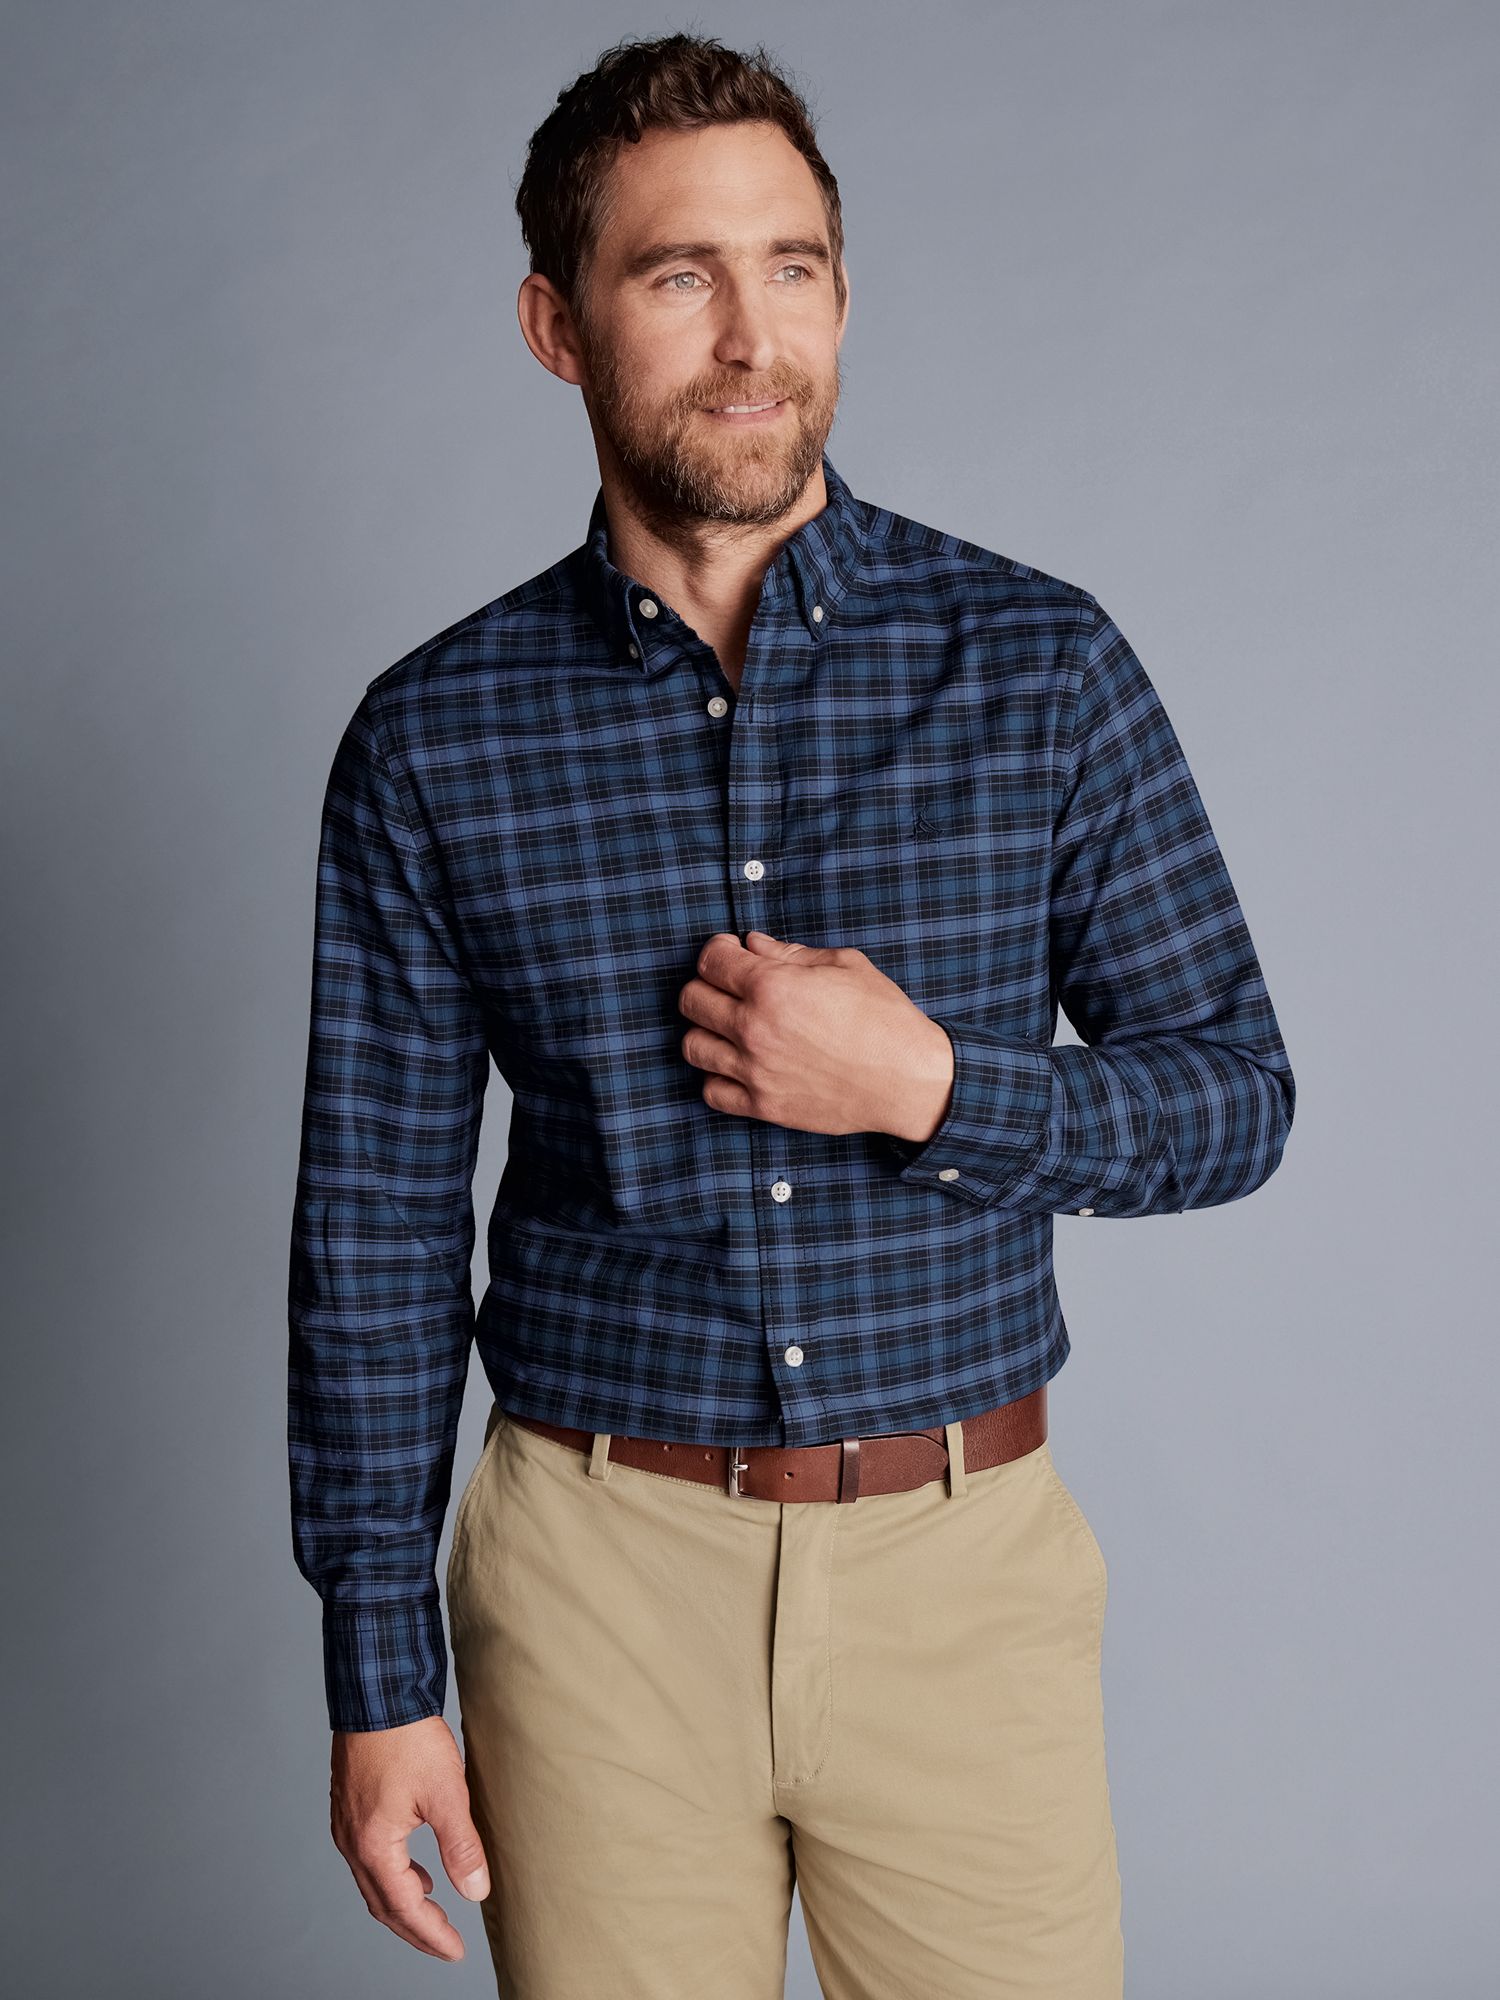 Charles Tyrwhitt Check Button-Down Washed Cotton Classic Fit Shirt ...